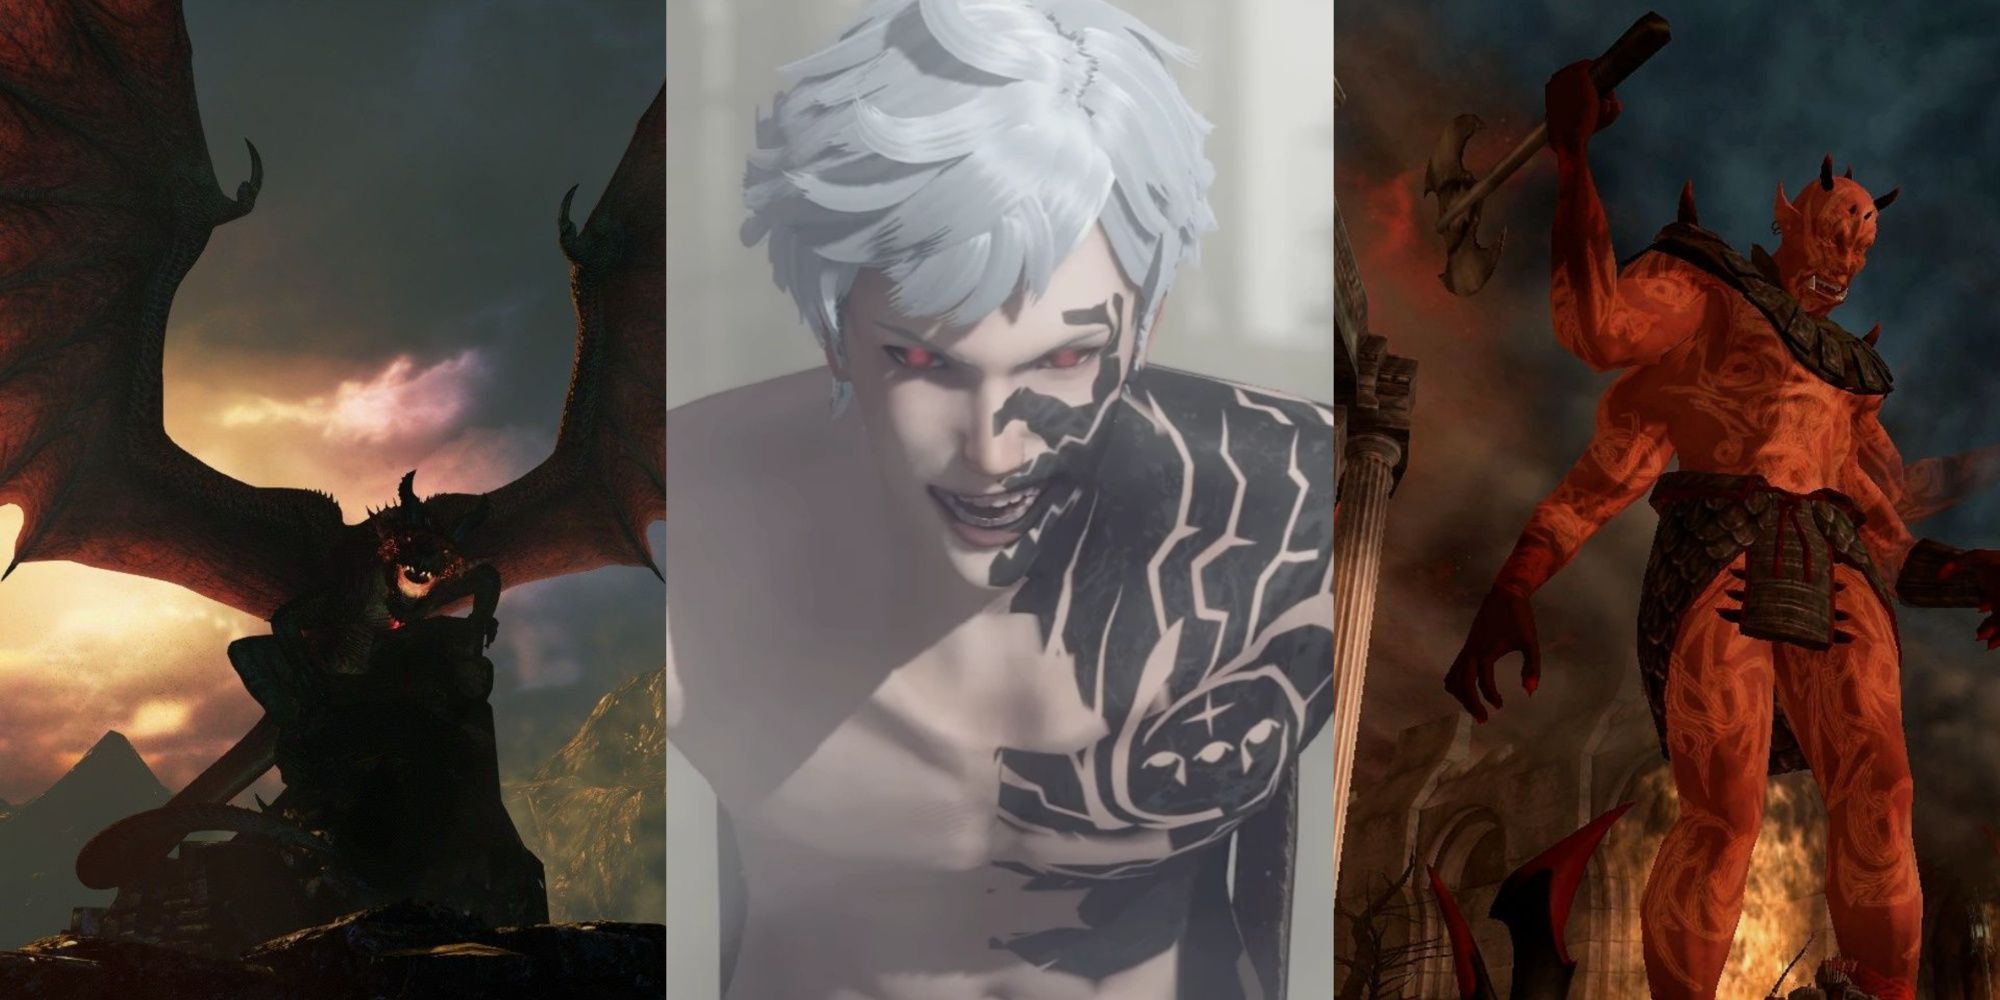 Grigori roaring while the sunsets in Dragon's Dogma, Eve from Nier Automata screaming as his eyes turn red, and Mehrunes Dagon stomping in the Imperial City of Oblivion, left to right